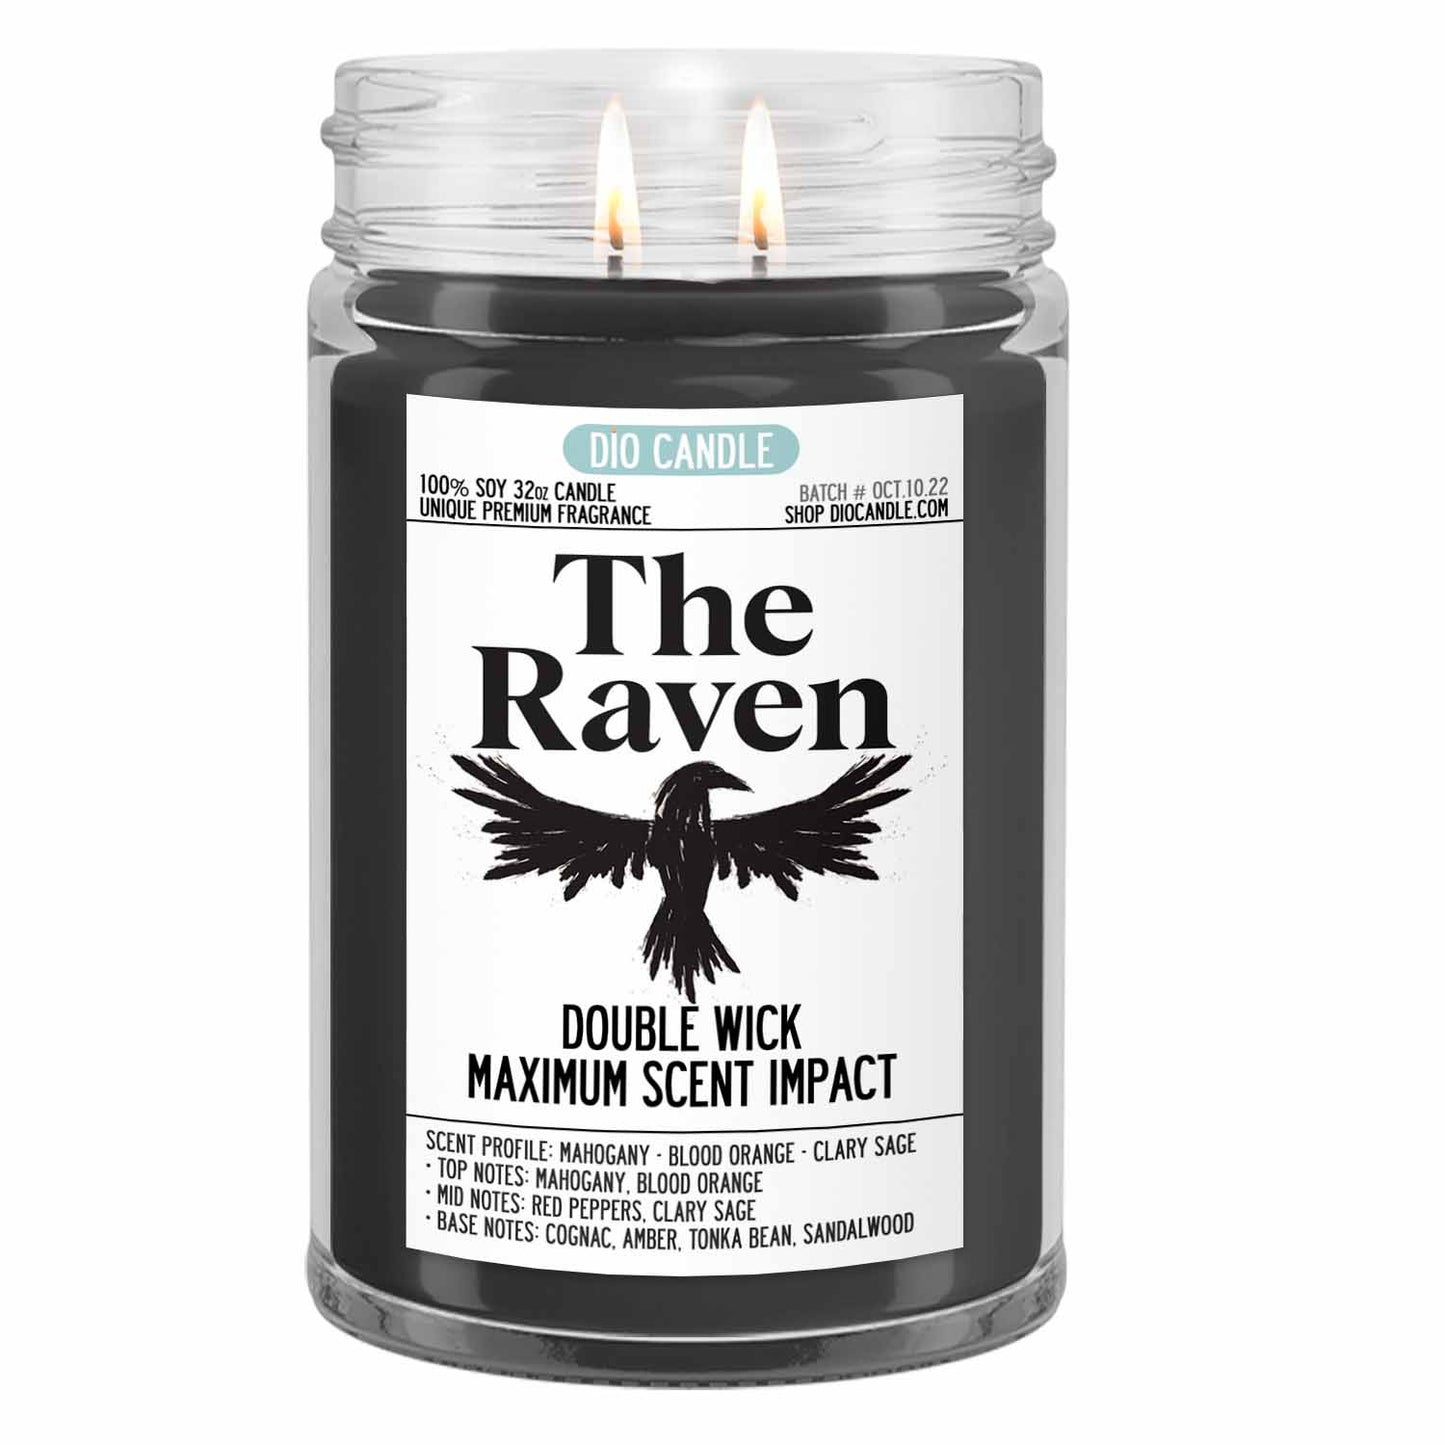 Raven Candle